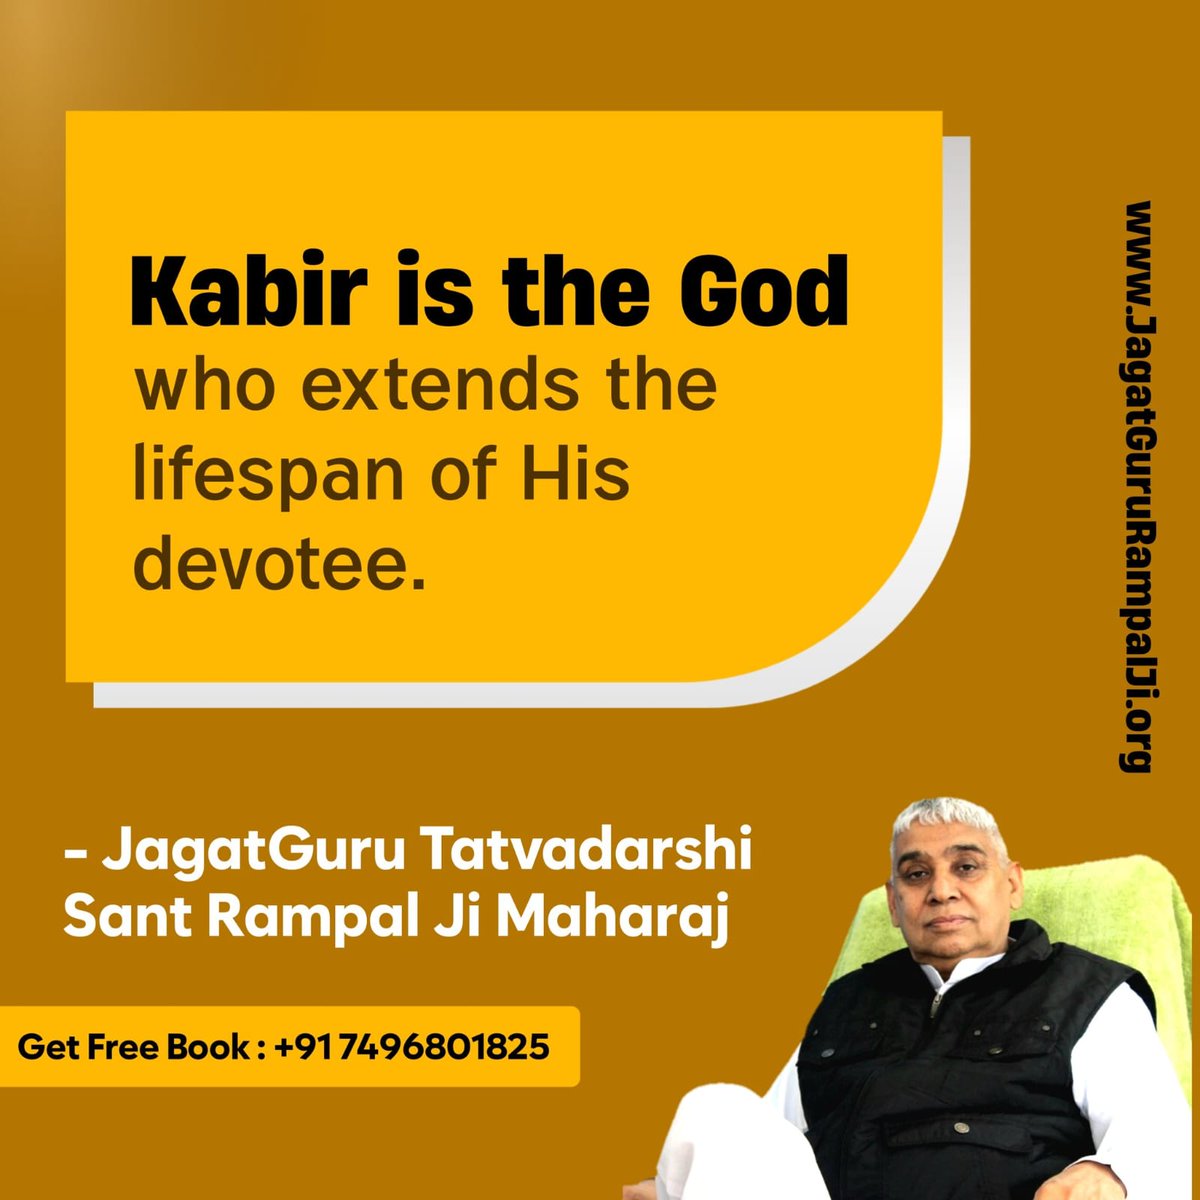 #GodMorningTuesday Kabir is the God who extends the lifespan of His devotee.